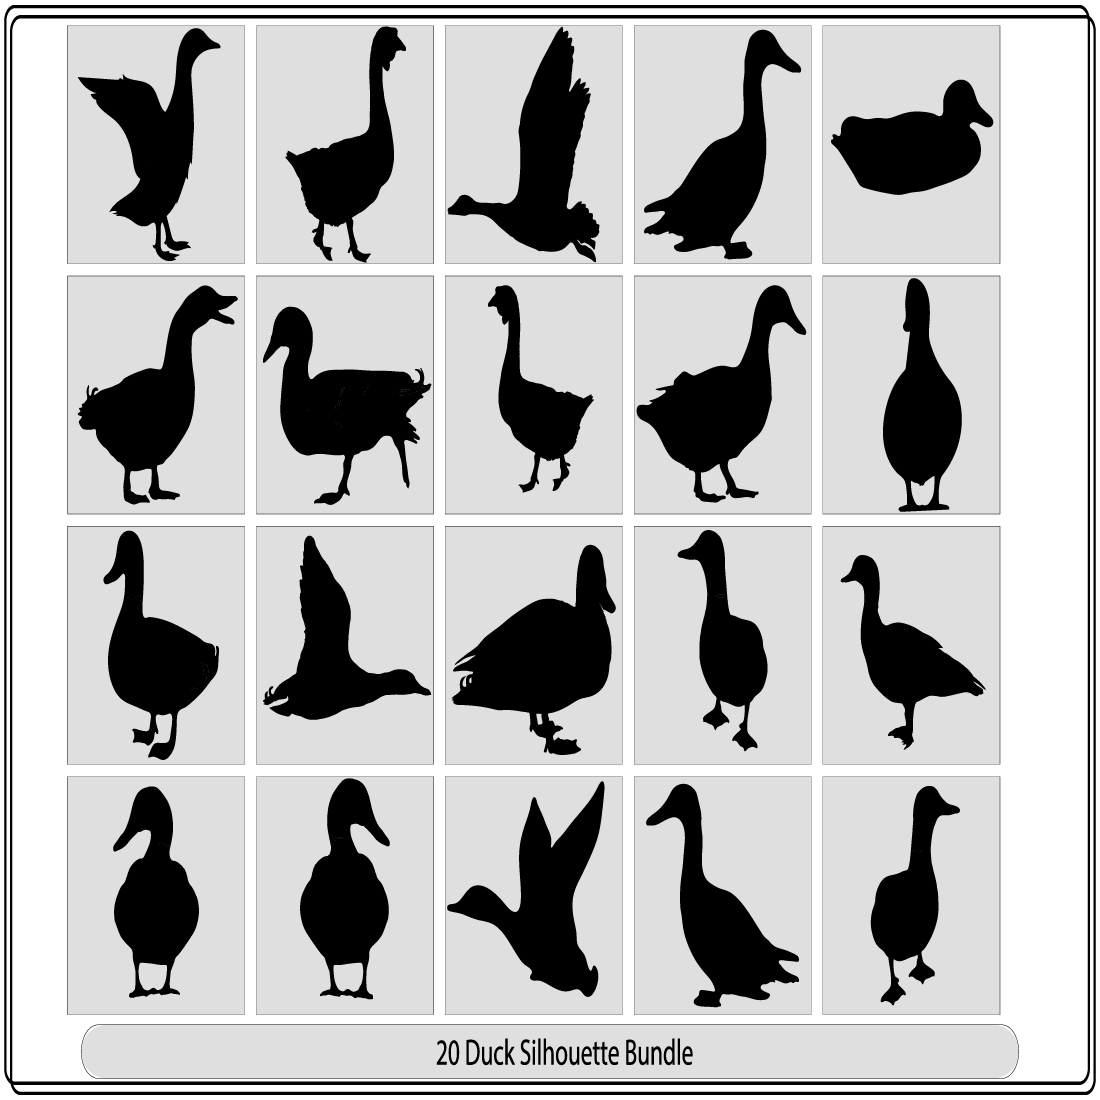 Silhouettes of wild and domestic duck, Duck in flight,silhouette of goose, duck, set,Real duck silhouette cover image.